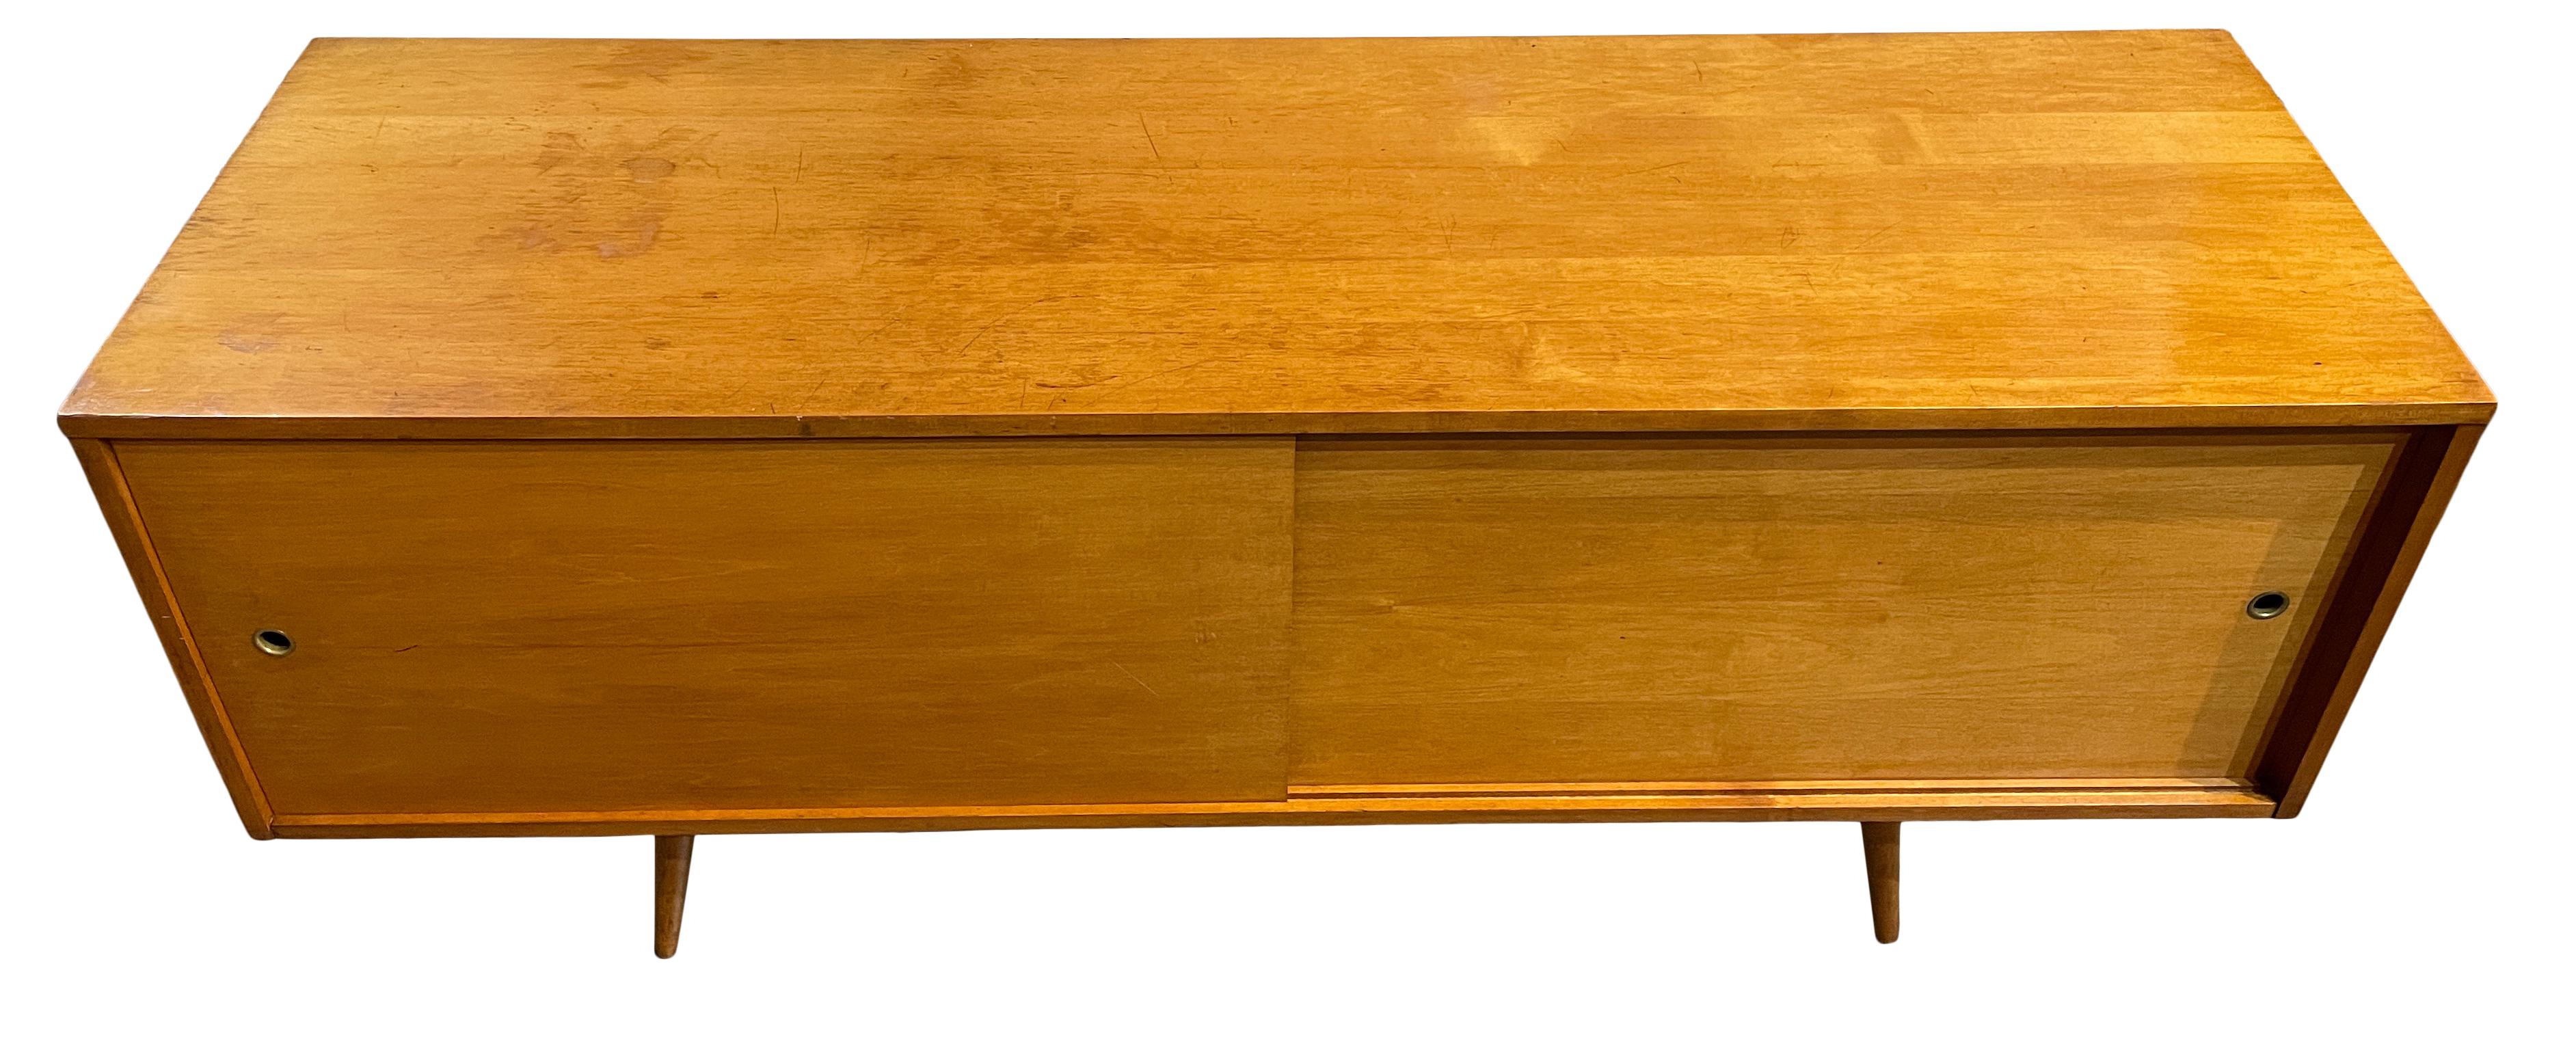 Beautiful midcentury low credenza cabinet with sliding doors by Paul McCobb circa 1950 planner group #1513 - solid maple construction has a Blonde maple finish. All original Wood sliding front doors with brass finger hole pull sits on 4 tapered